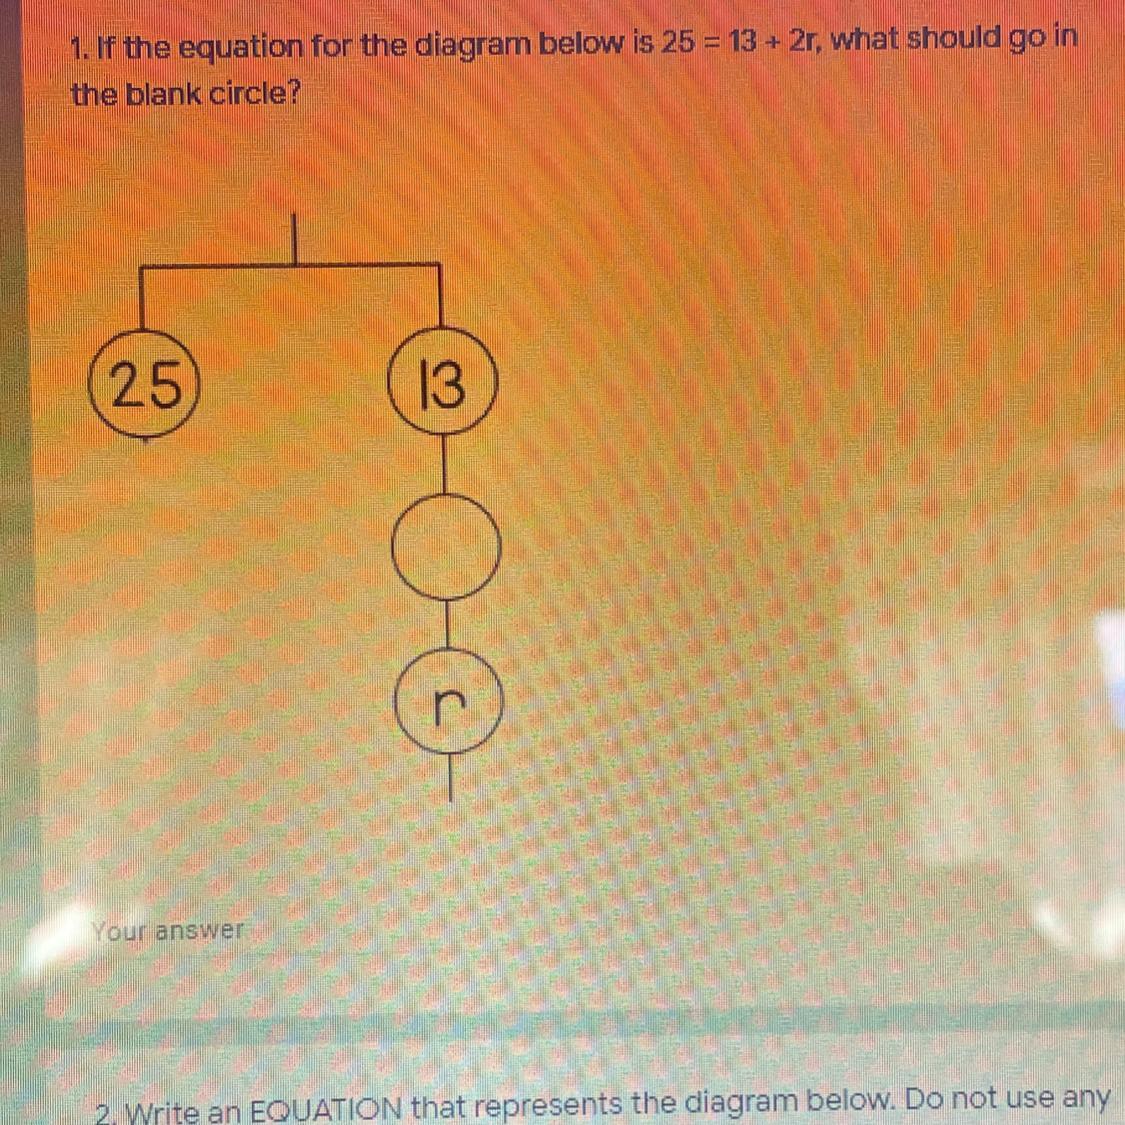 20 POINTS! WILL MARK BRAINLIEST! If The Equation For The Diagram Below Is 25=13+2r, What Should Go In